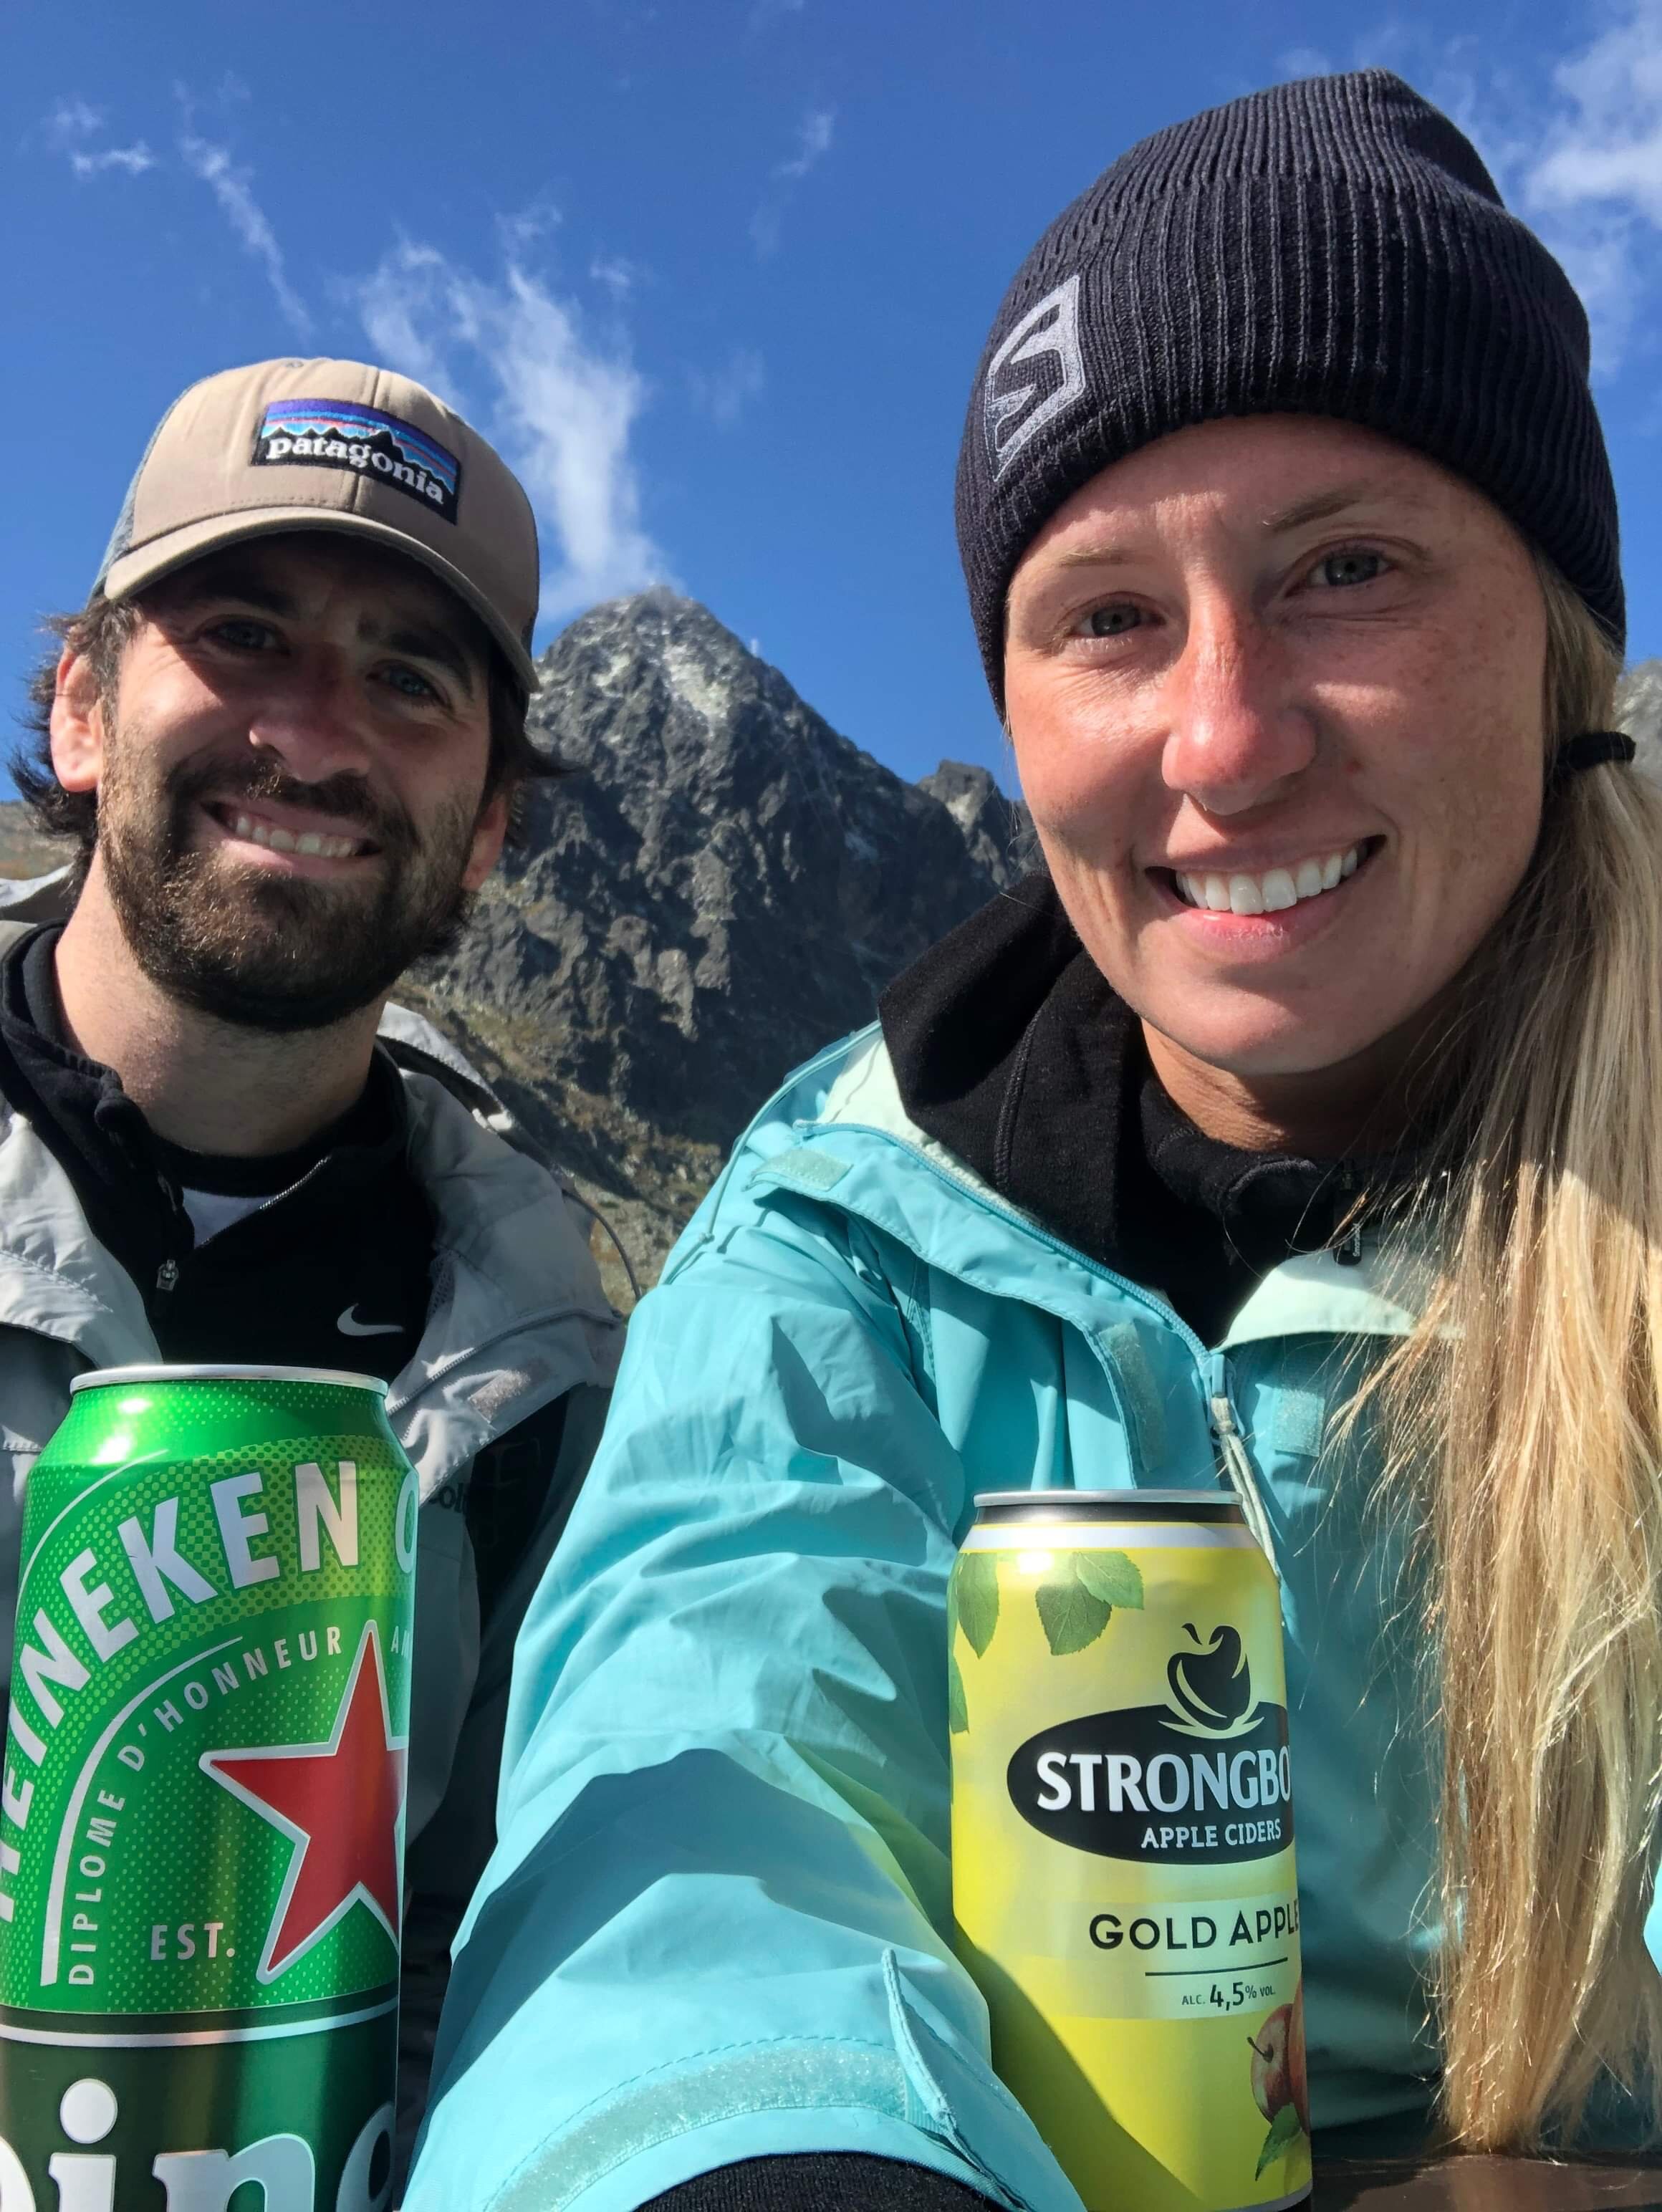 Thank you Michaela! We enjoyed your beer donation at the top of a peak in Slovakia. A well deserved reward after a long hike.